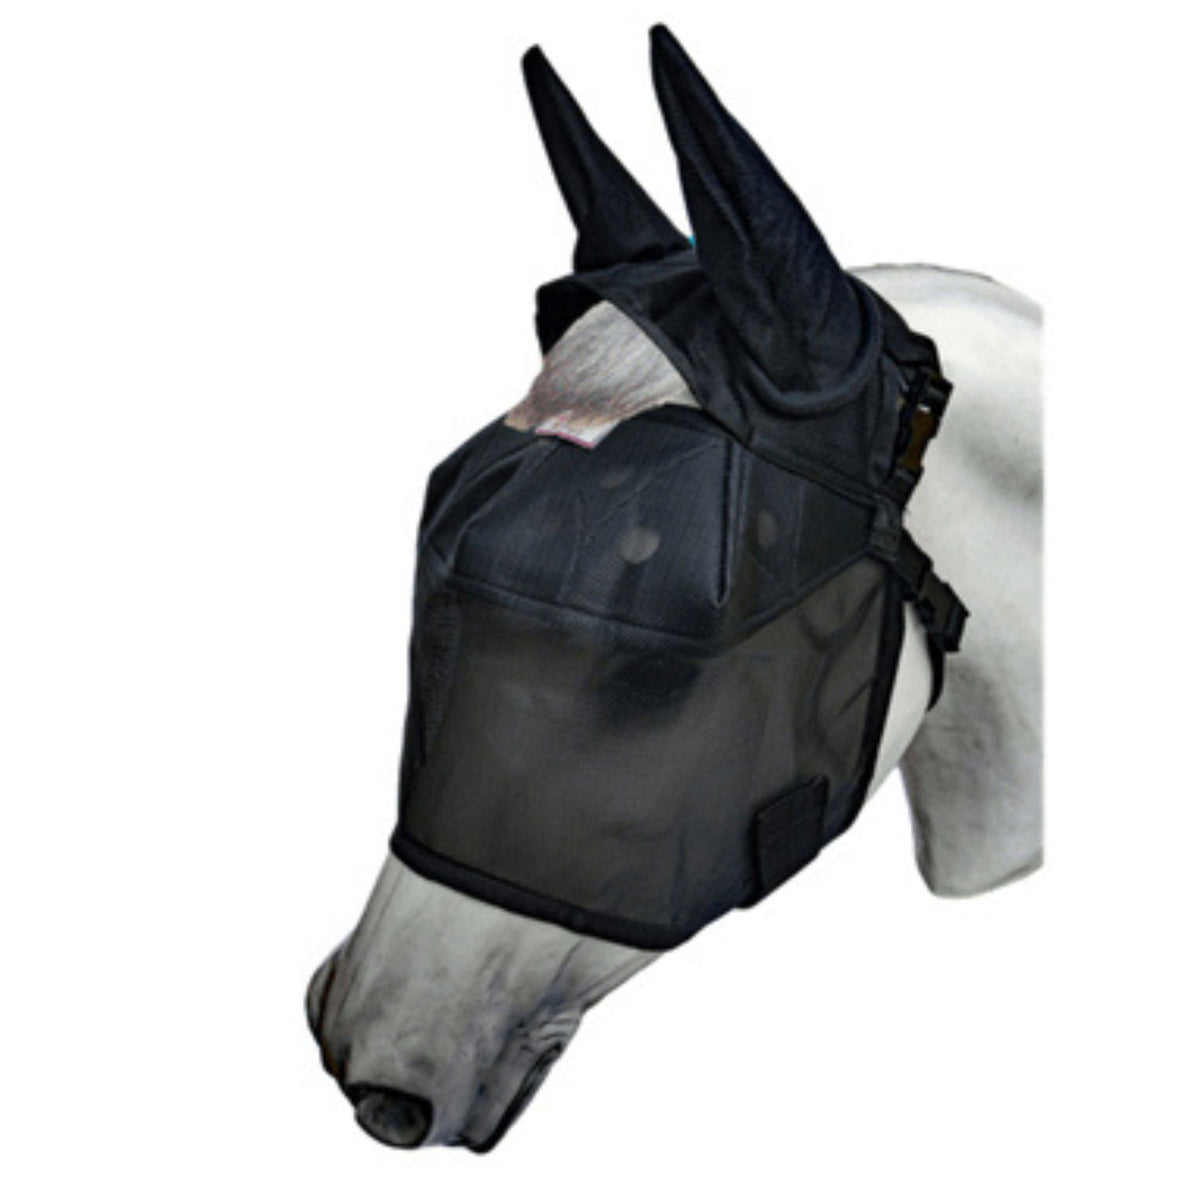 Model horse head wearing black fly mask with ear covering component.